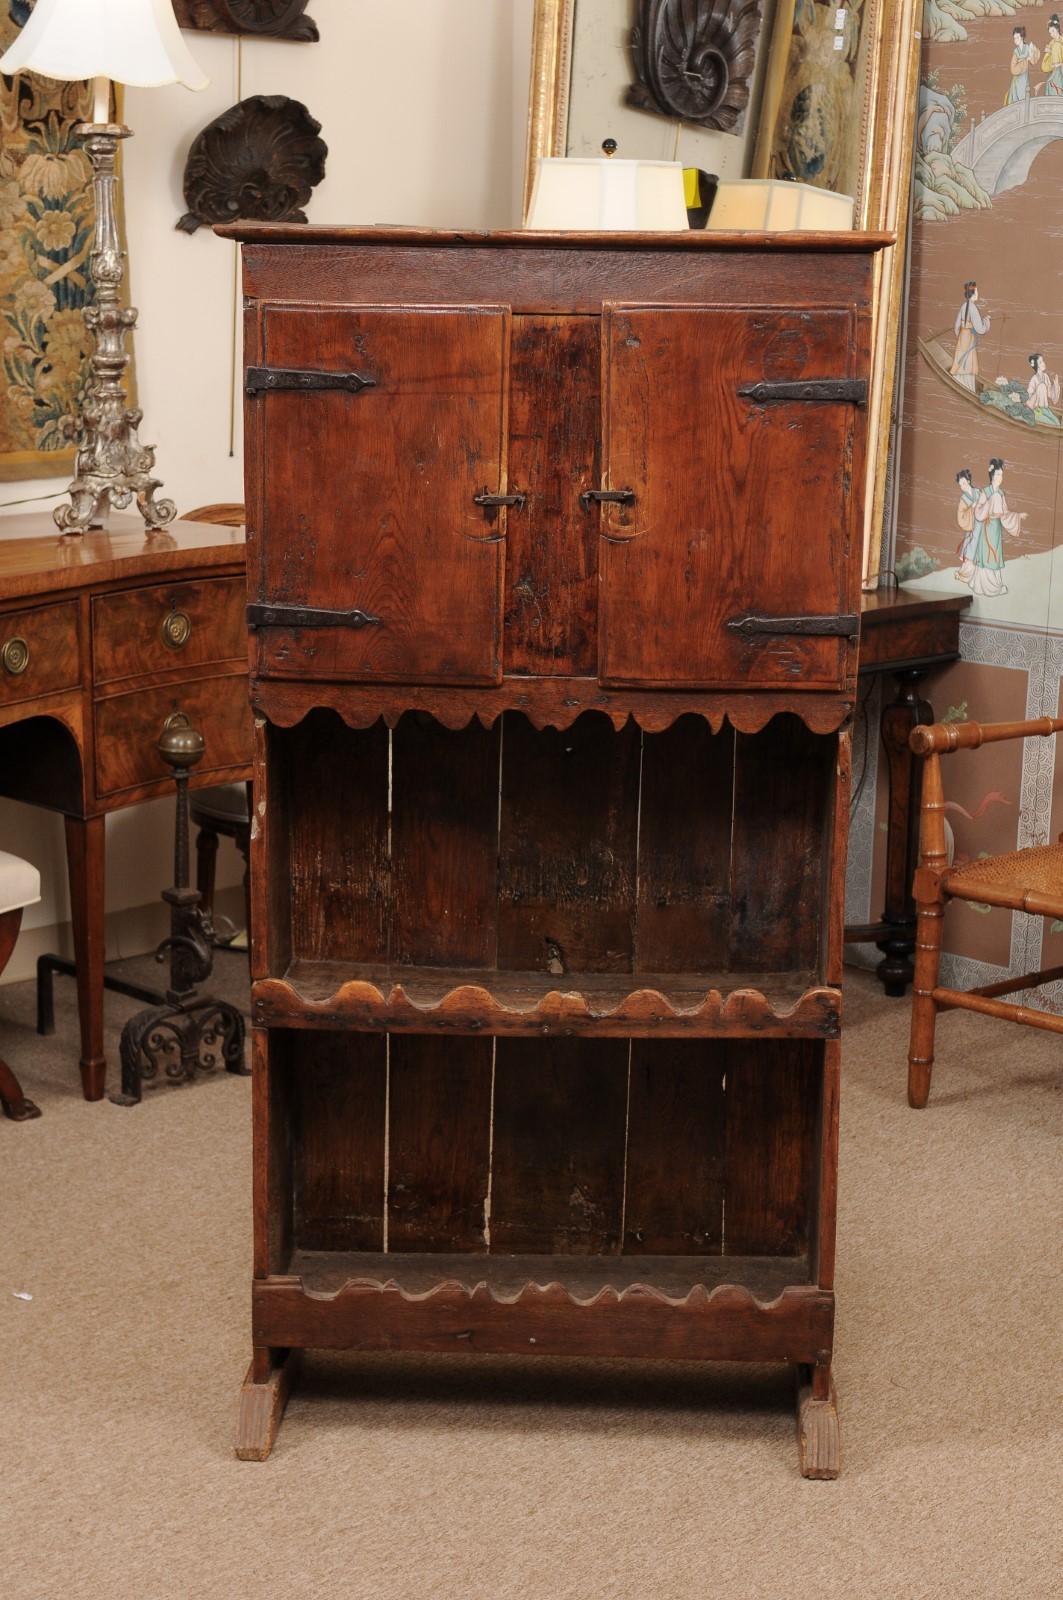 18th century Spanish pine cupboard with 2 cabinet doors over open shelves.
   